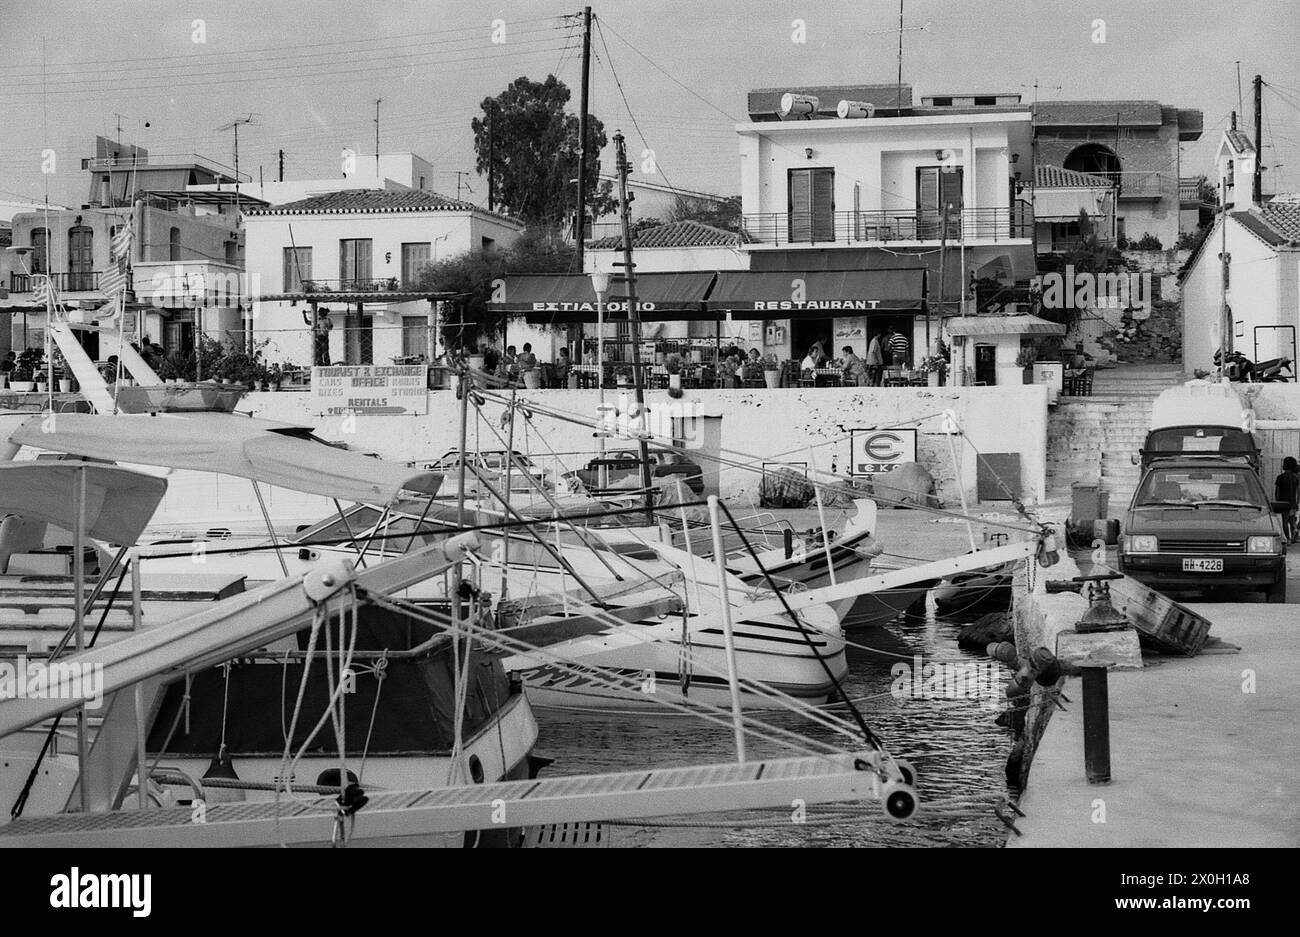 Harbor in Perdika on the island of Aegina in Greece. In the foreground there are boats and in the background customers in a restaurant. Stock Photo